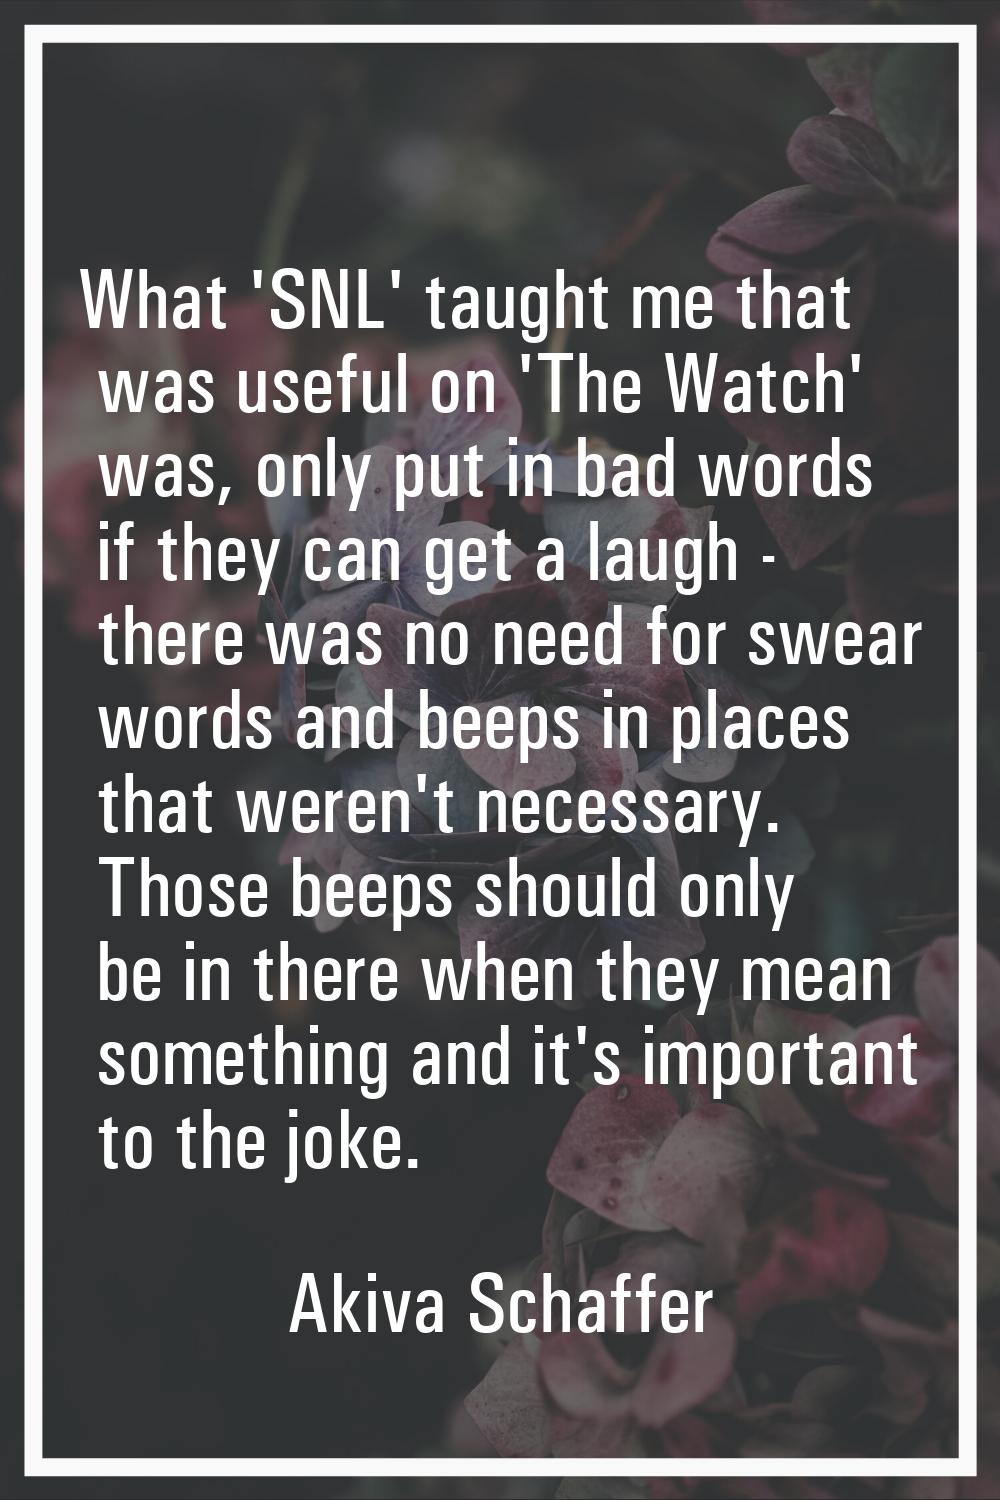 What 'SNL' taught me that was useful on 'The Watch' was, only put in bad words if they can get a la